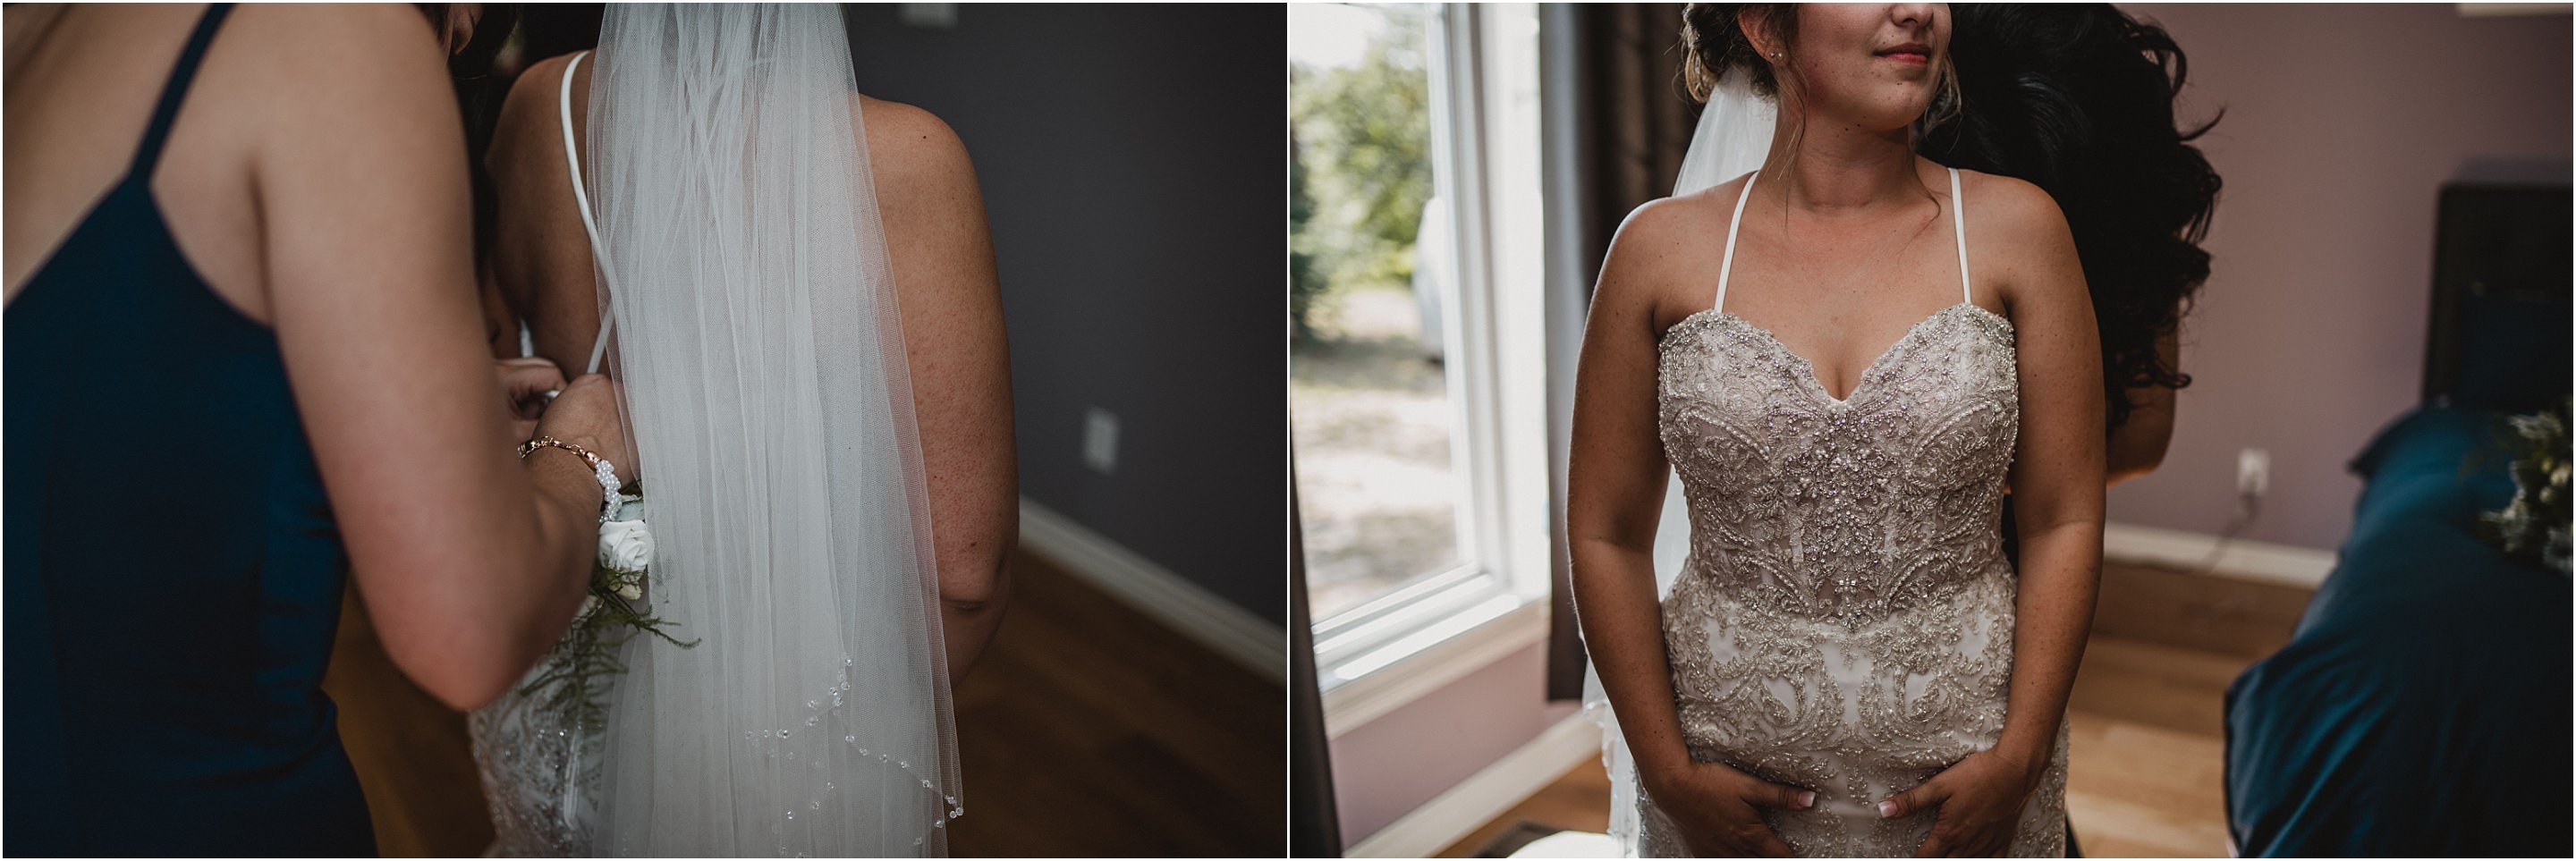 Chutes Coulonge Wedding by Cindy Lottes Photography